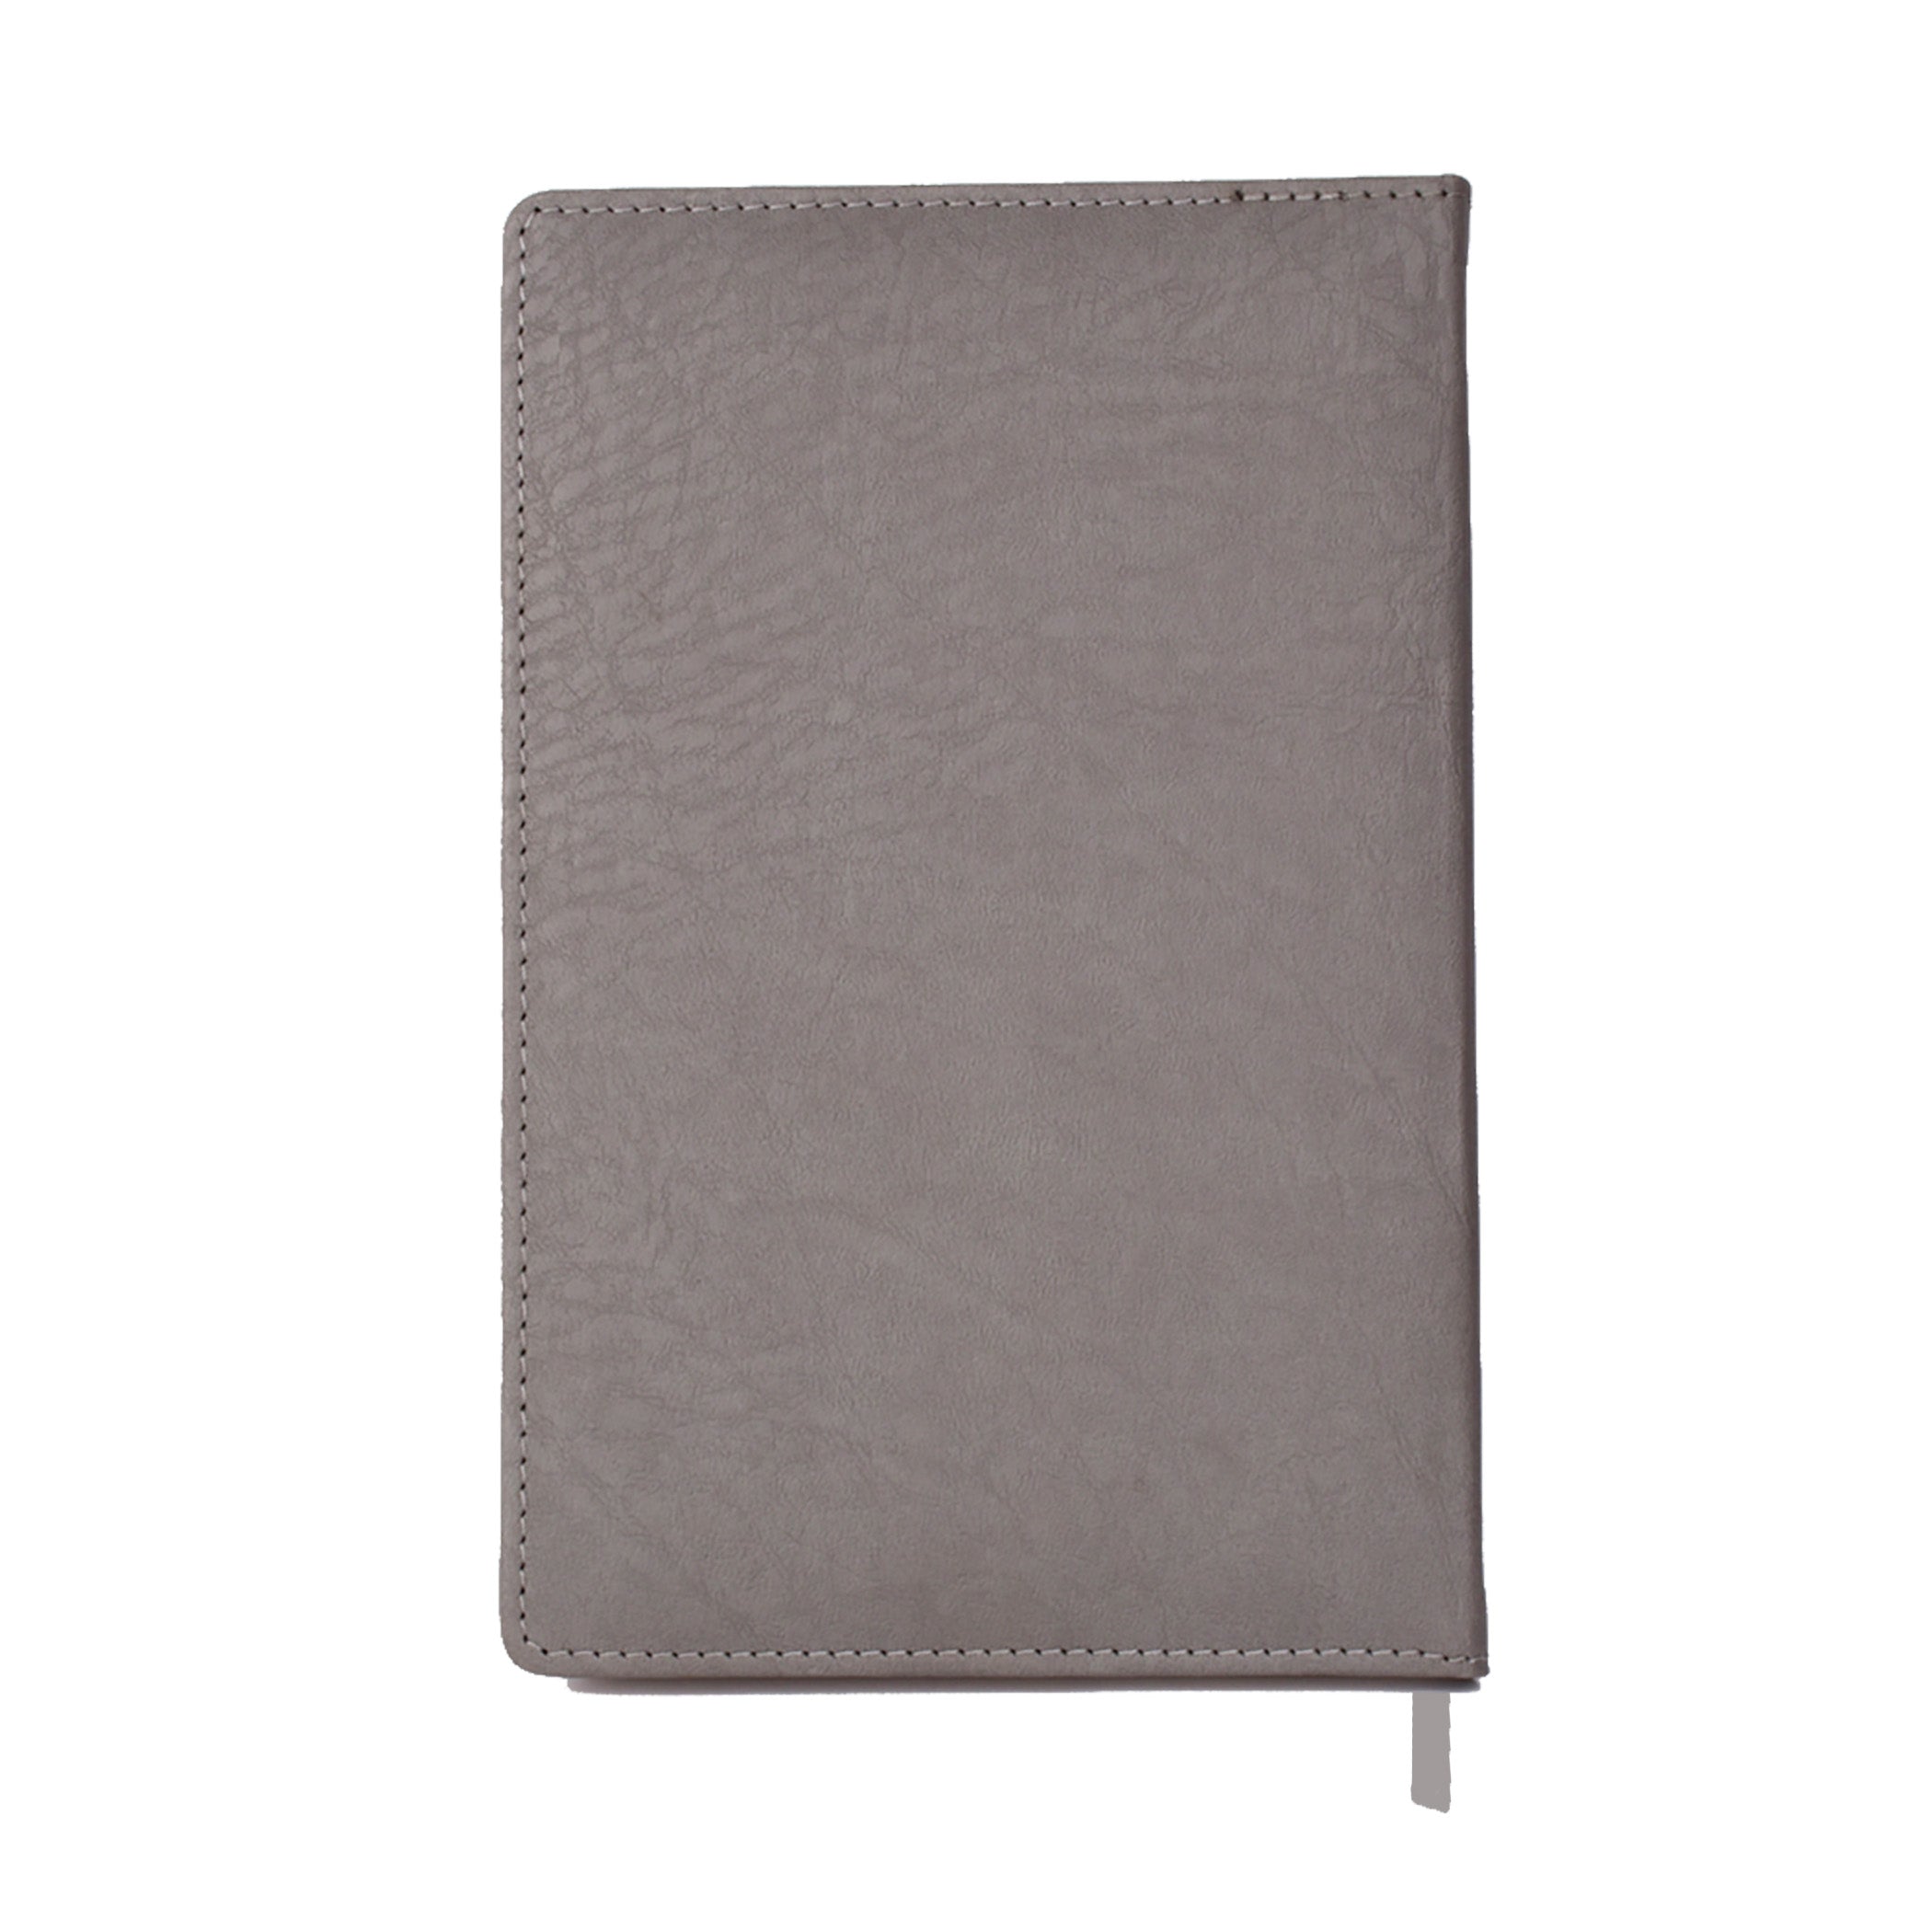 Personalized Graham A5 Hard Bound Executive Notebook - Grey